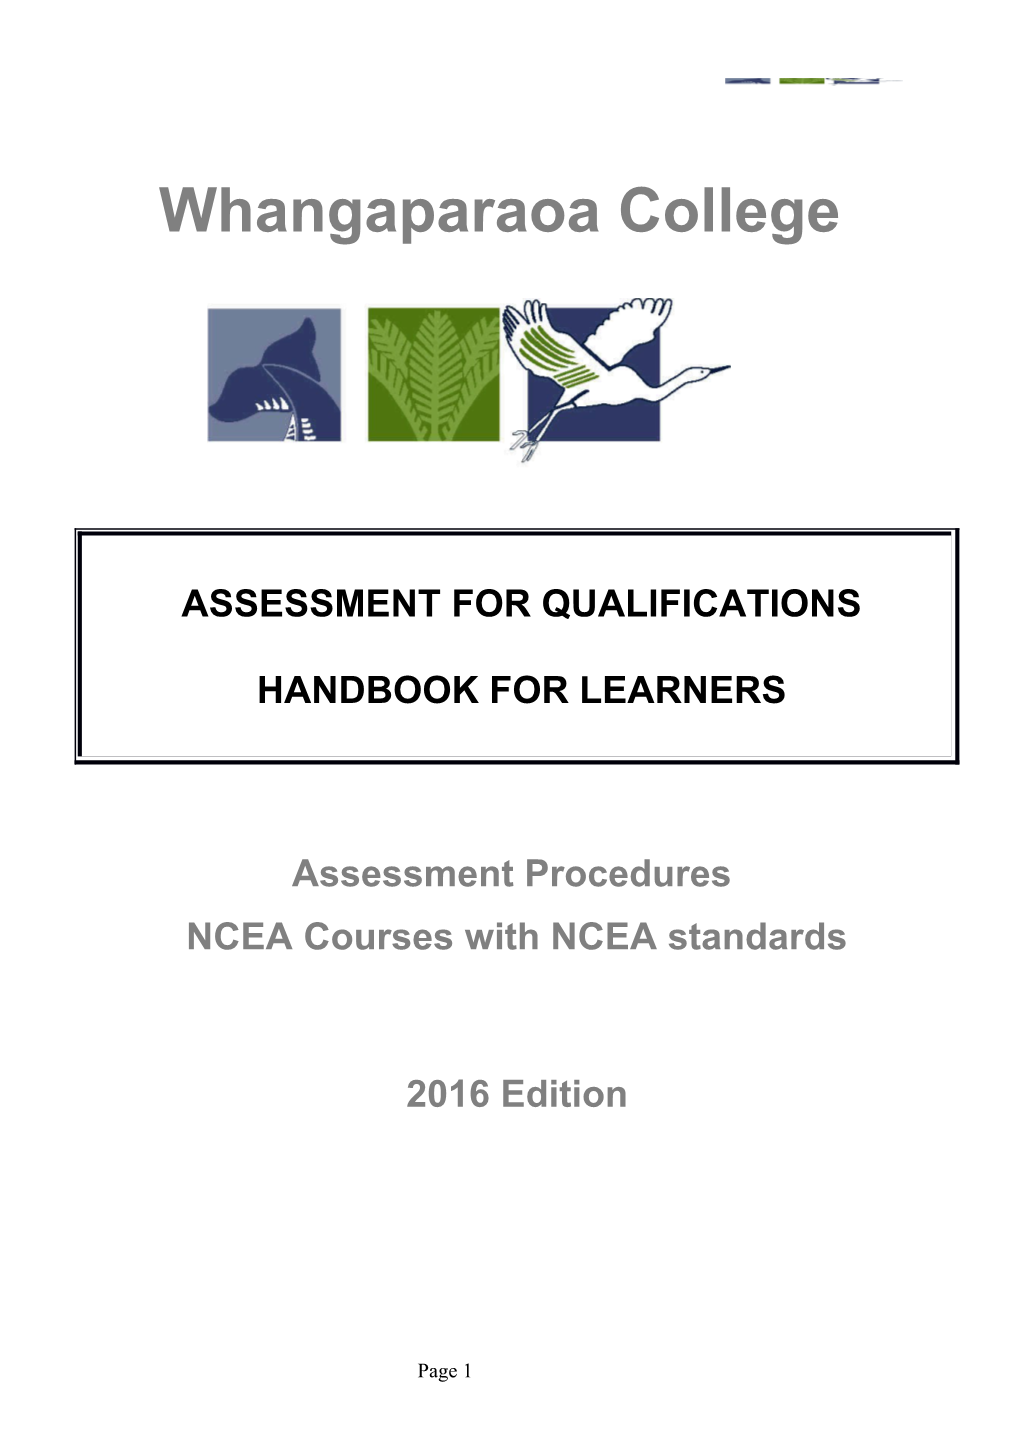 Assessment for Qualifications